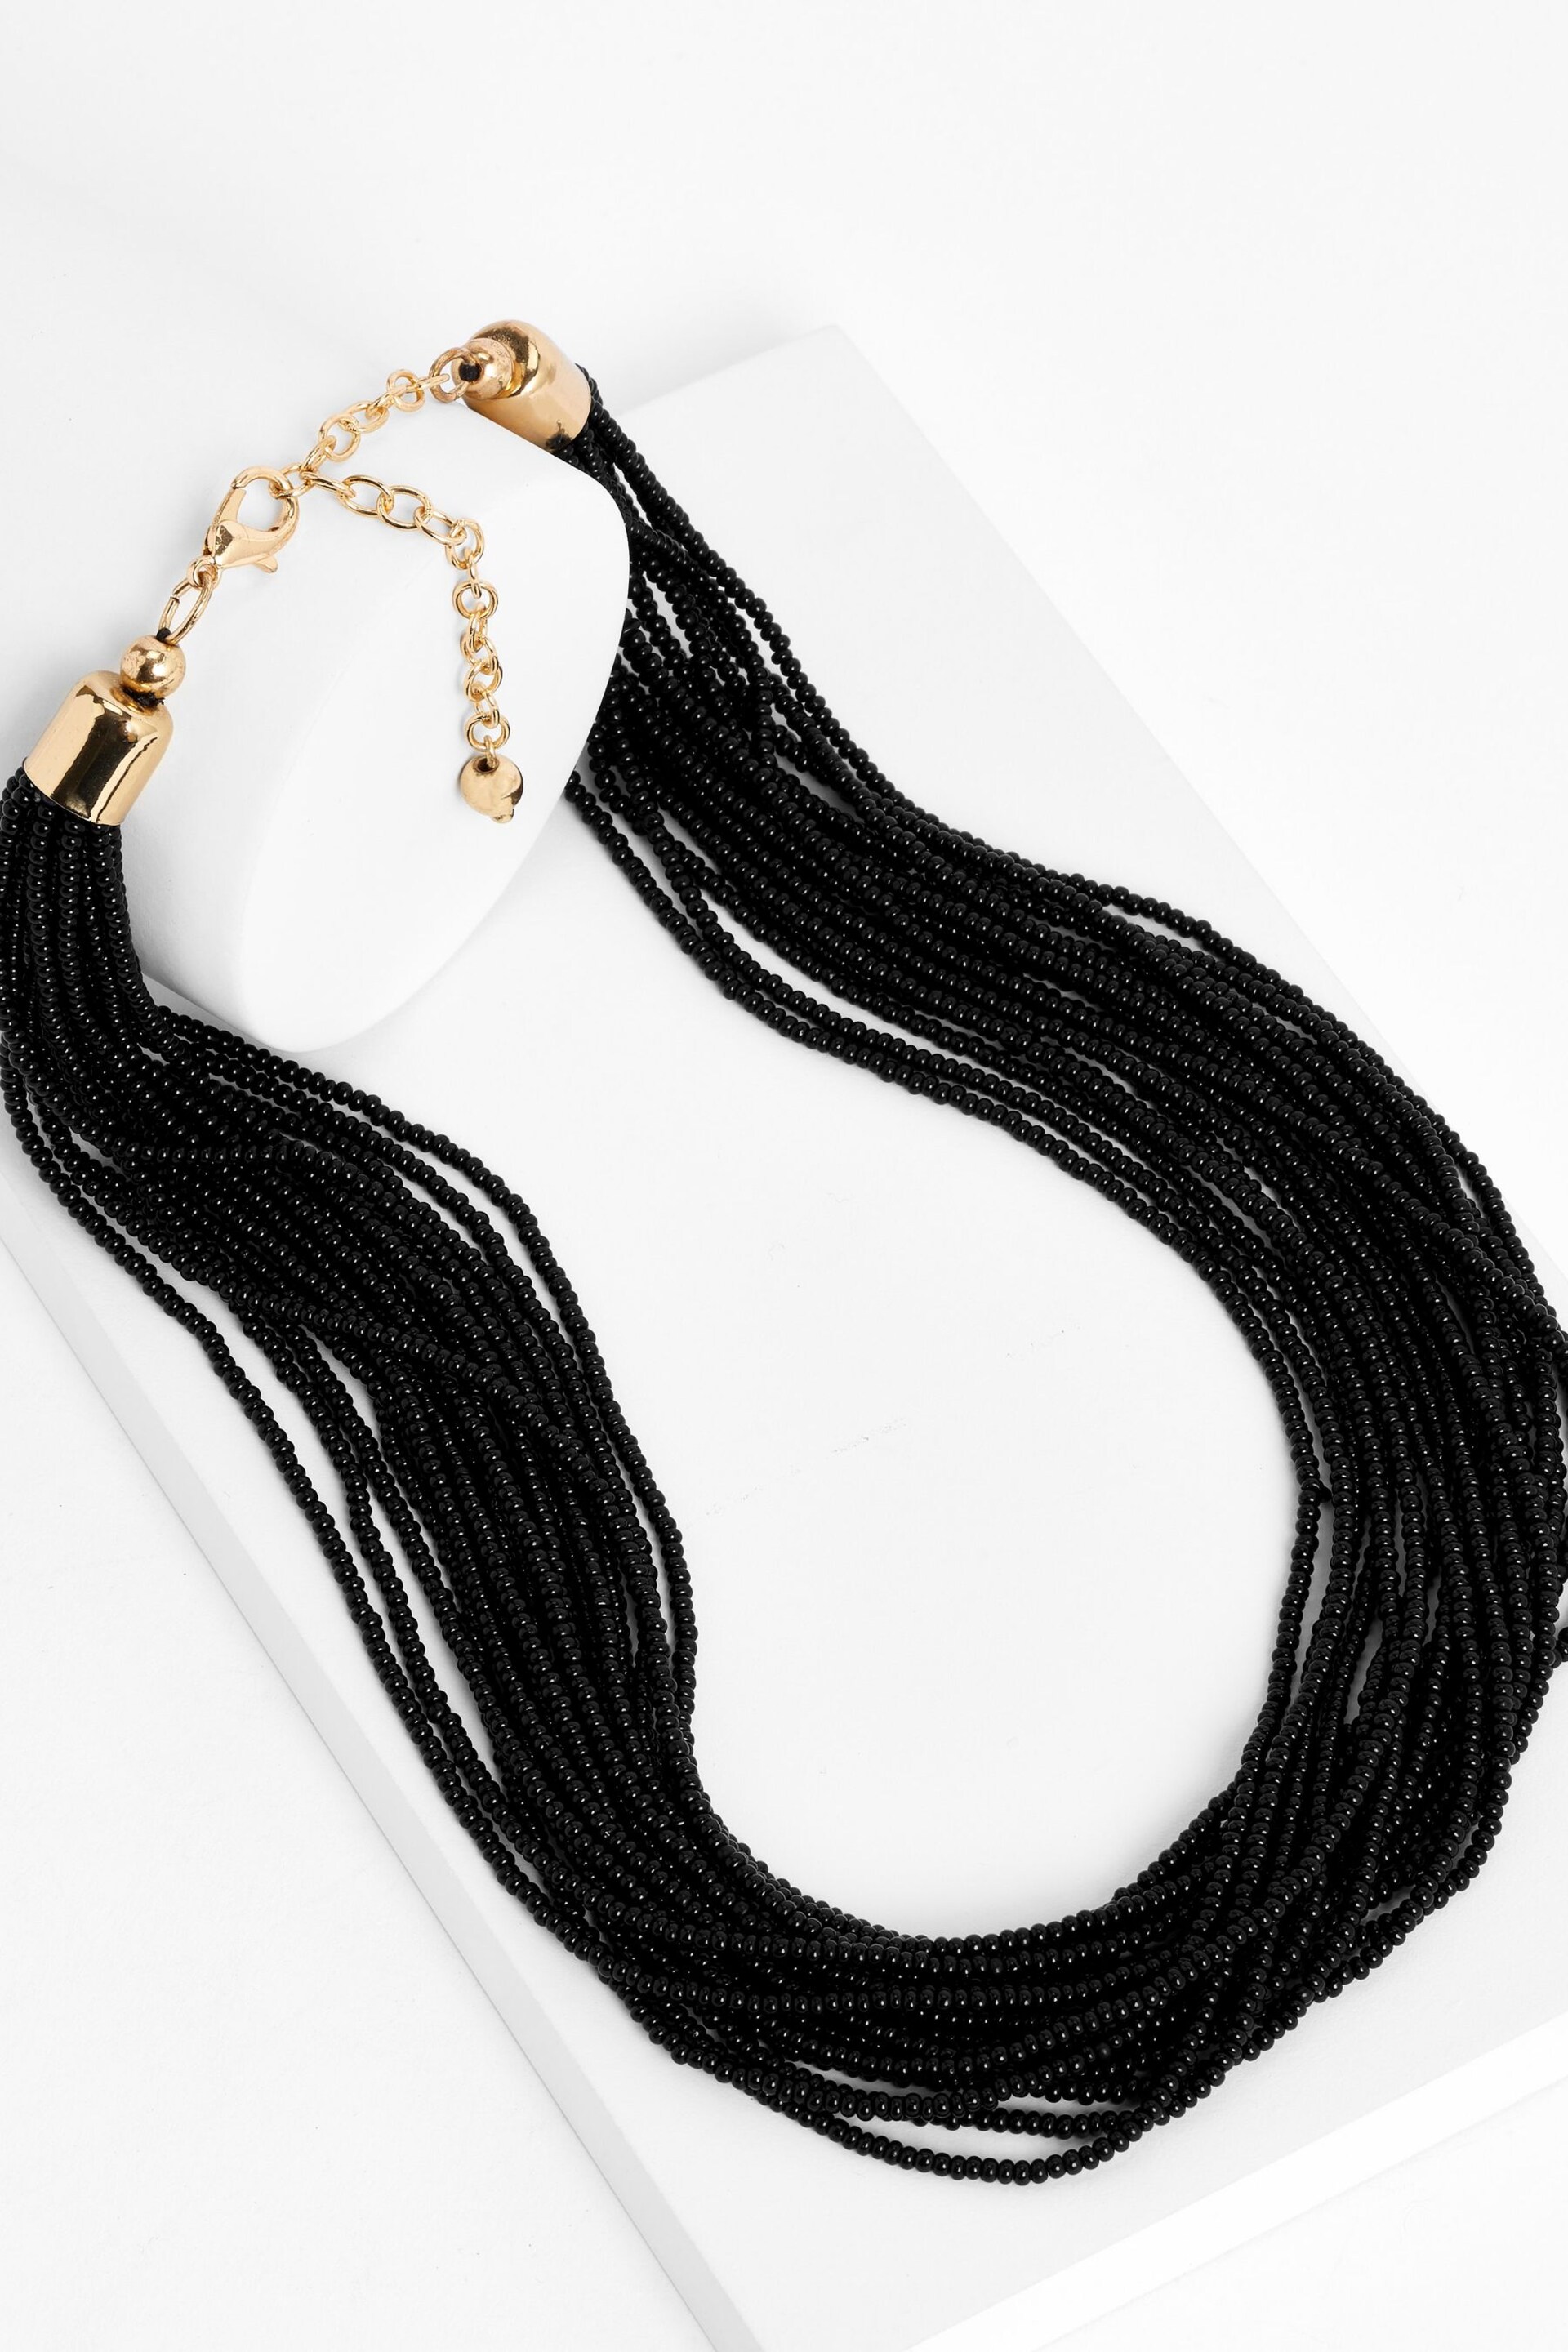 Black Multi Layer Beaded Necklace - Image 1 of 4